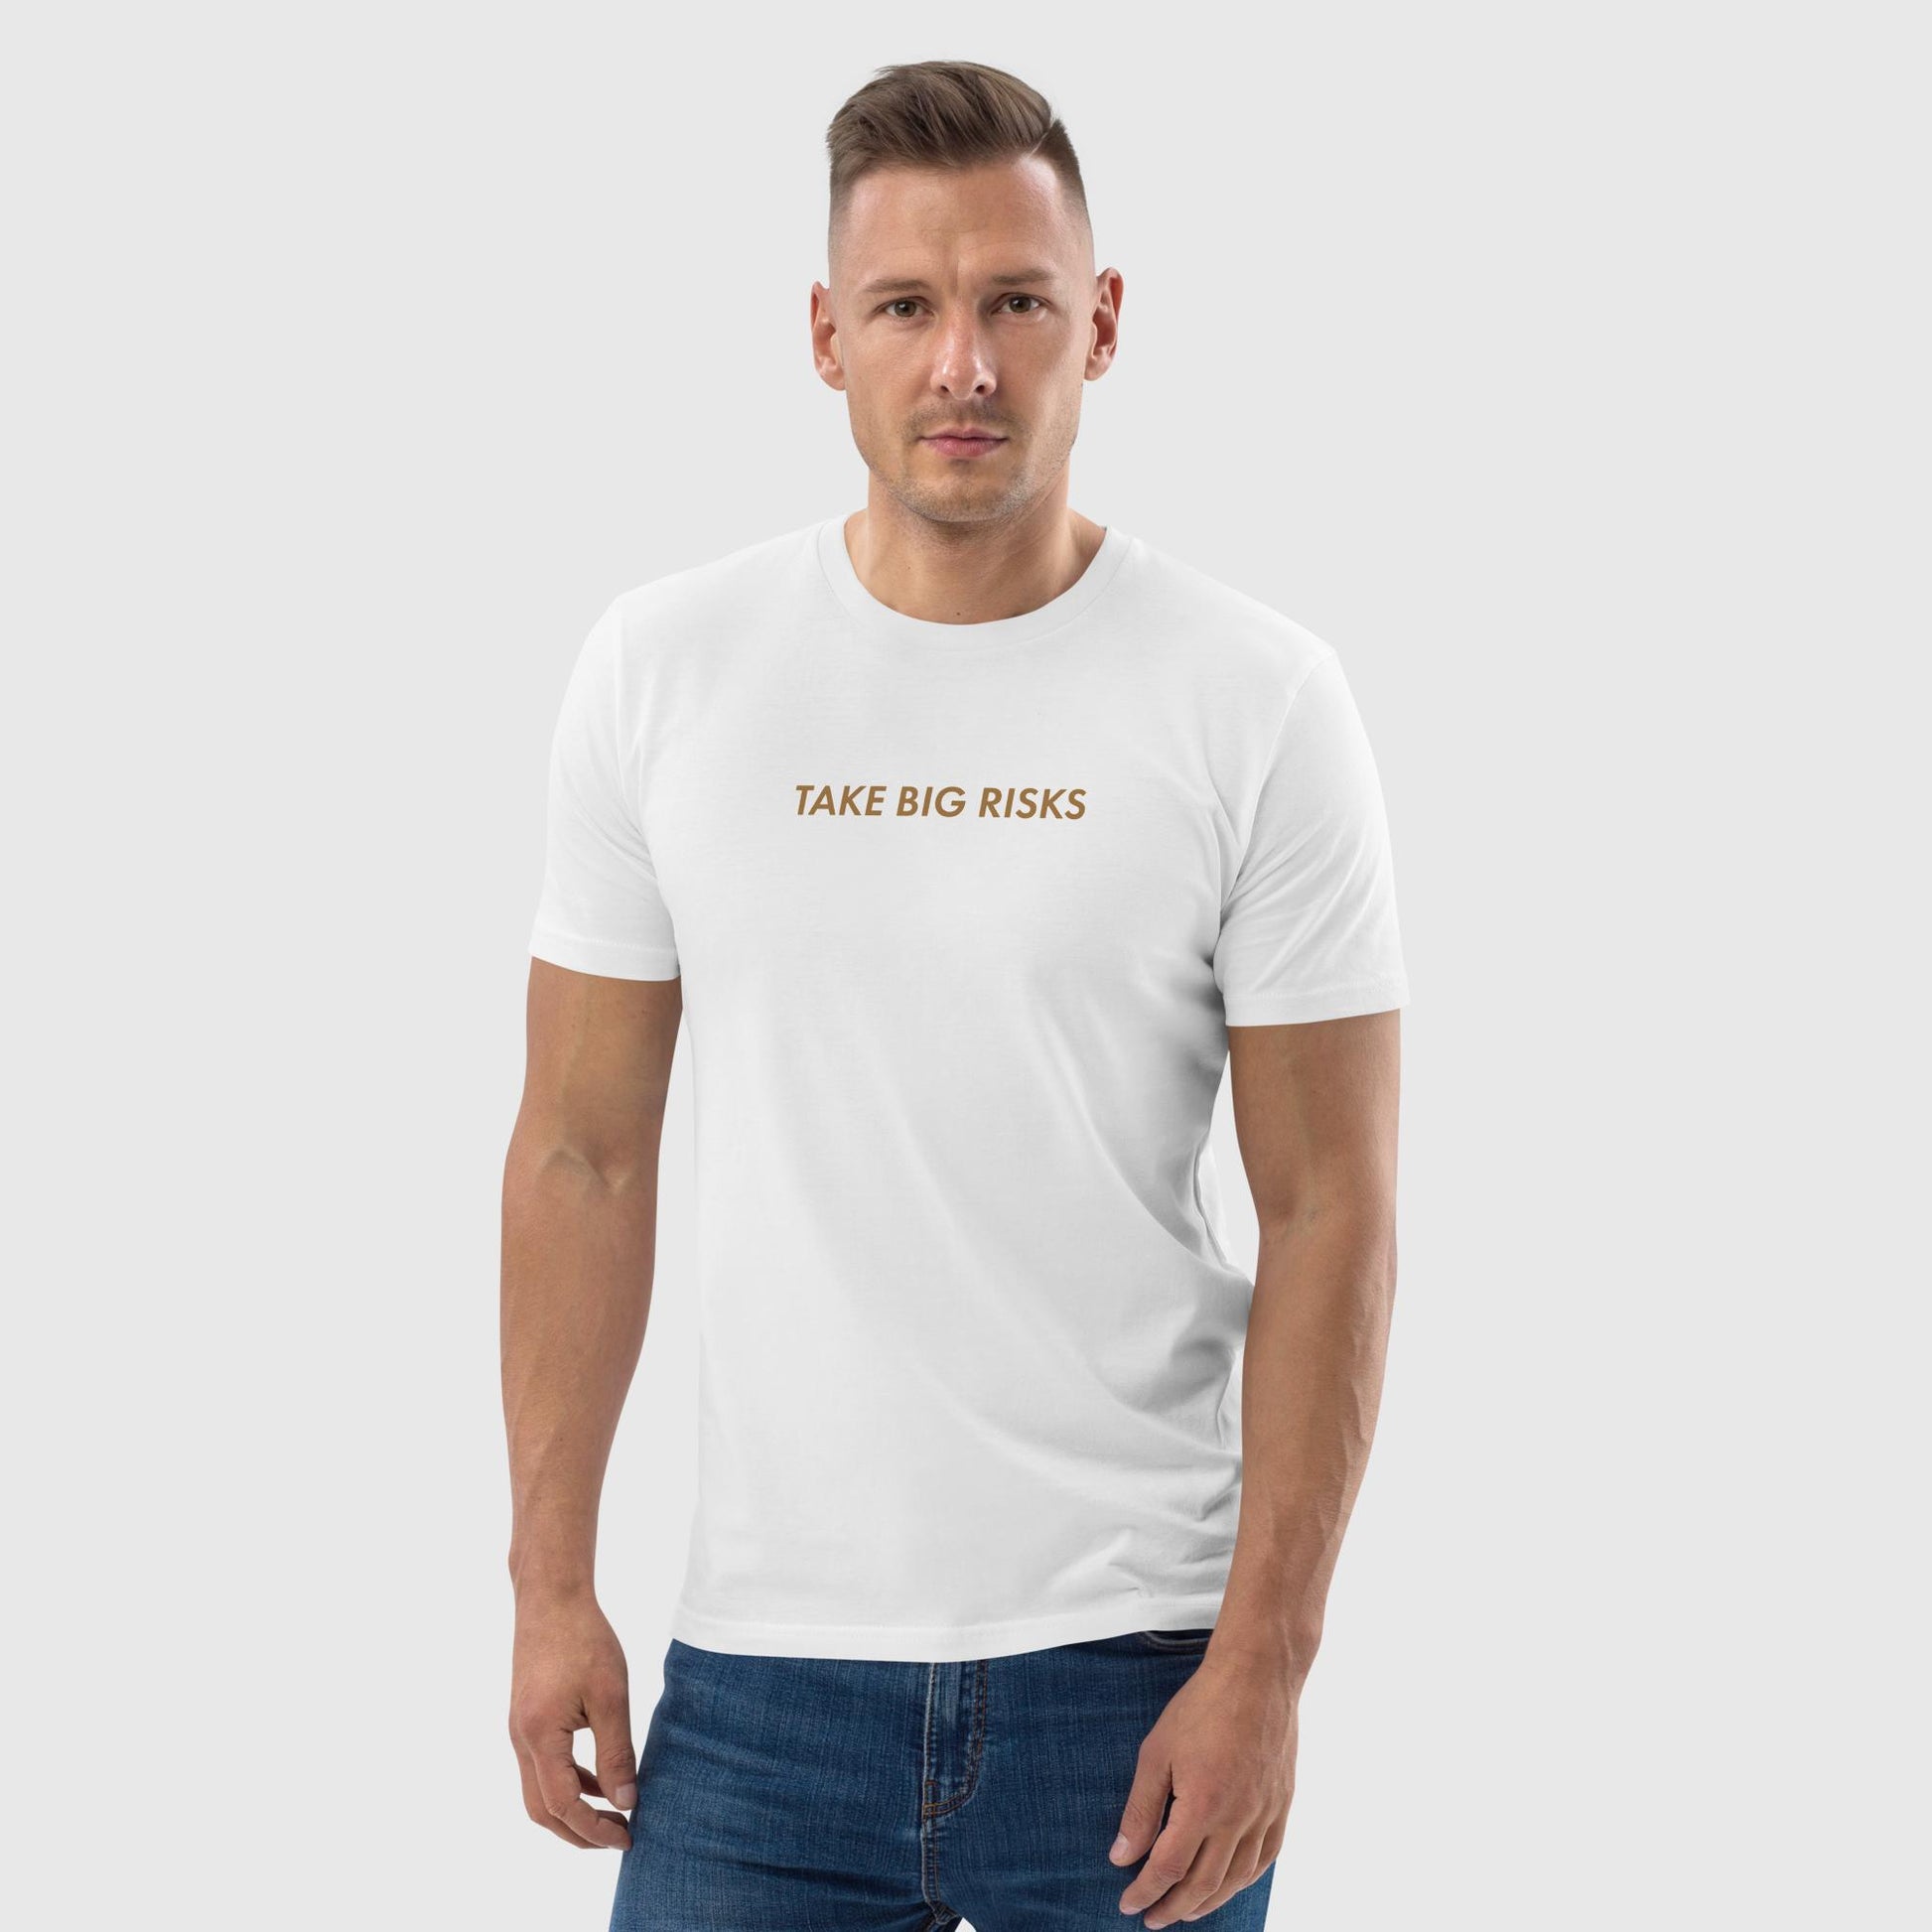 Men's white organic cotton t-shirt that features Bill Gates' quote on success, "Take Big Risks."